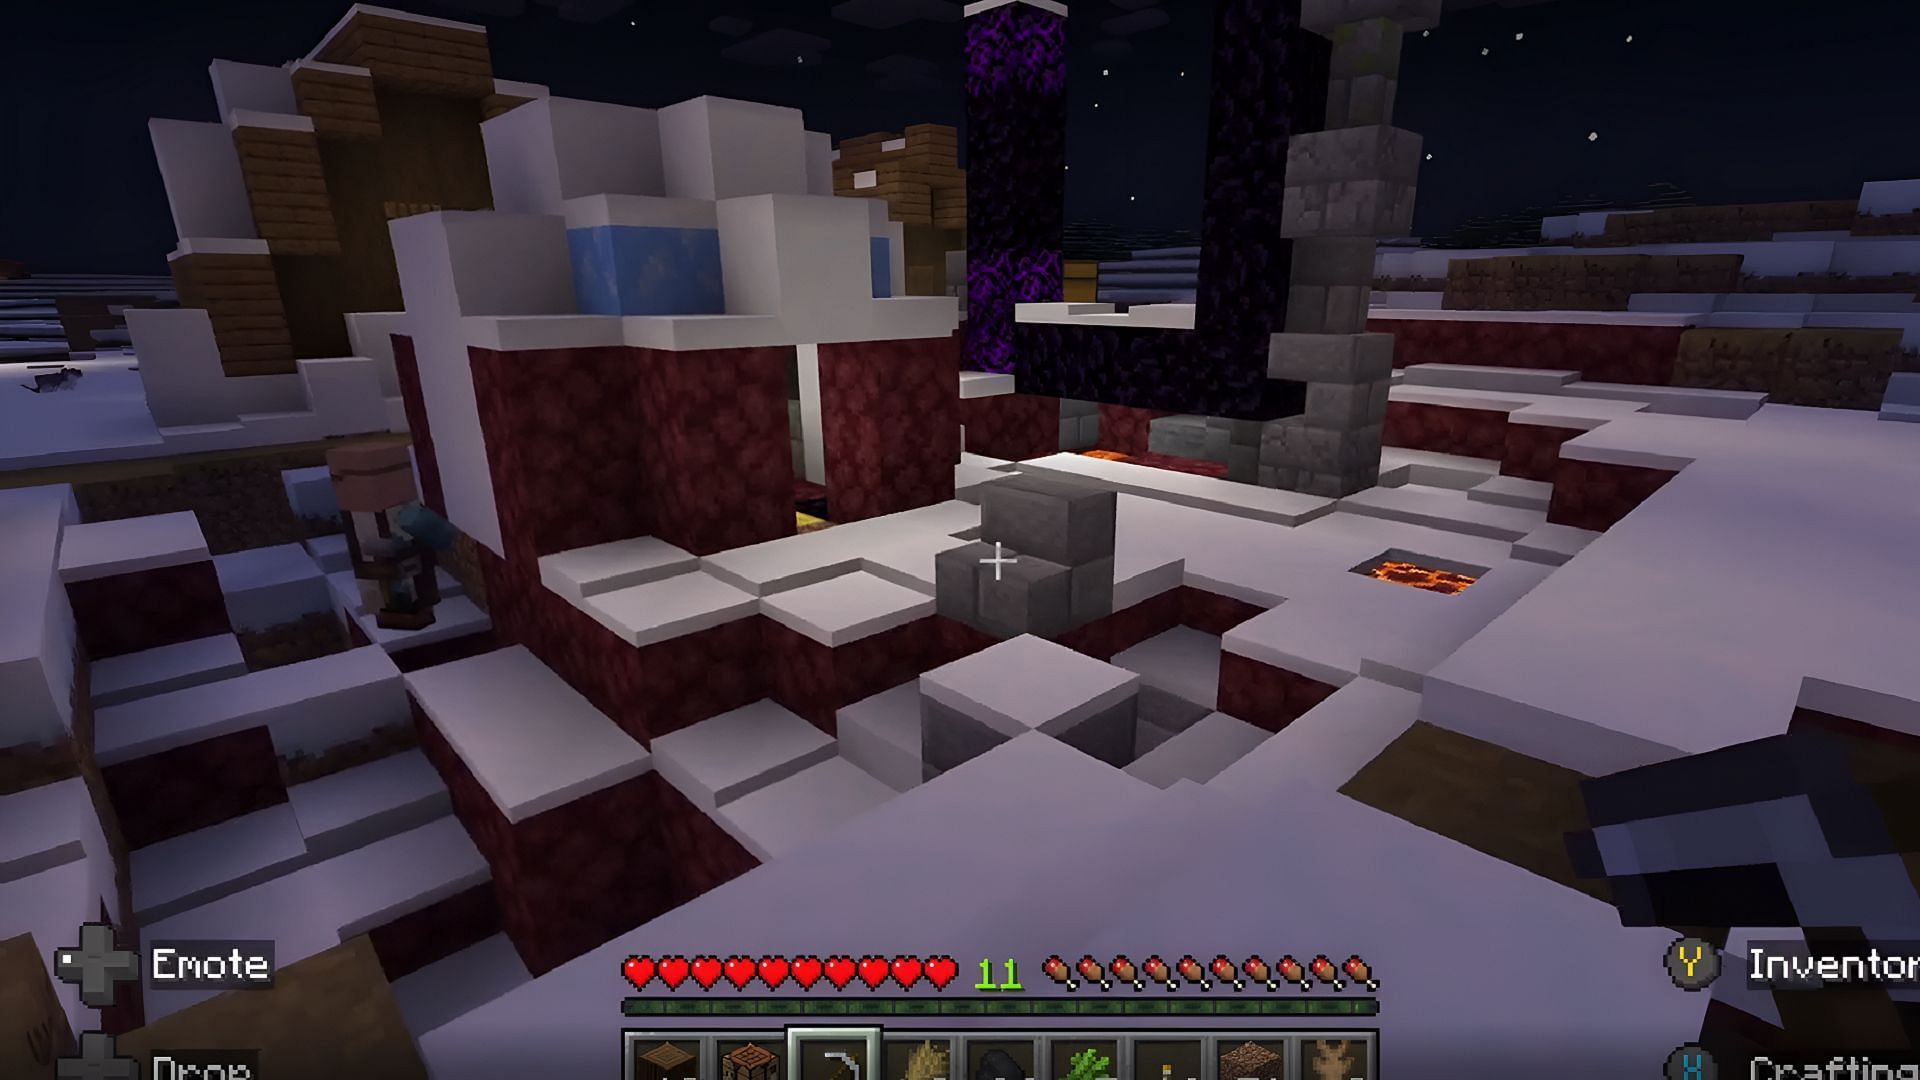 A Minecraft player recently shared an igloo partially made of netherrack.